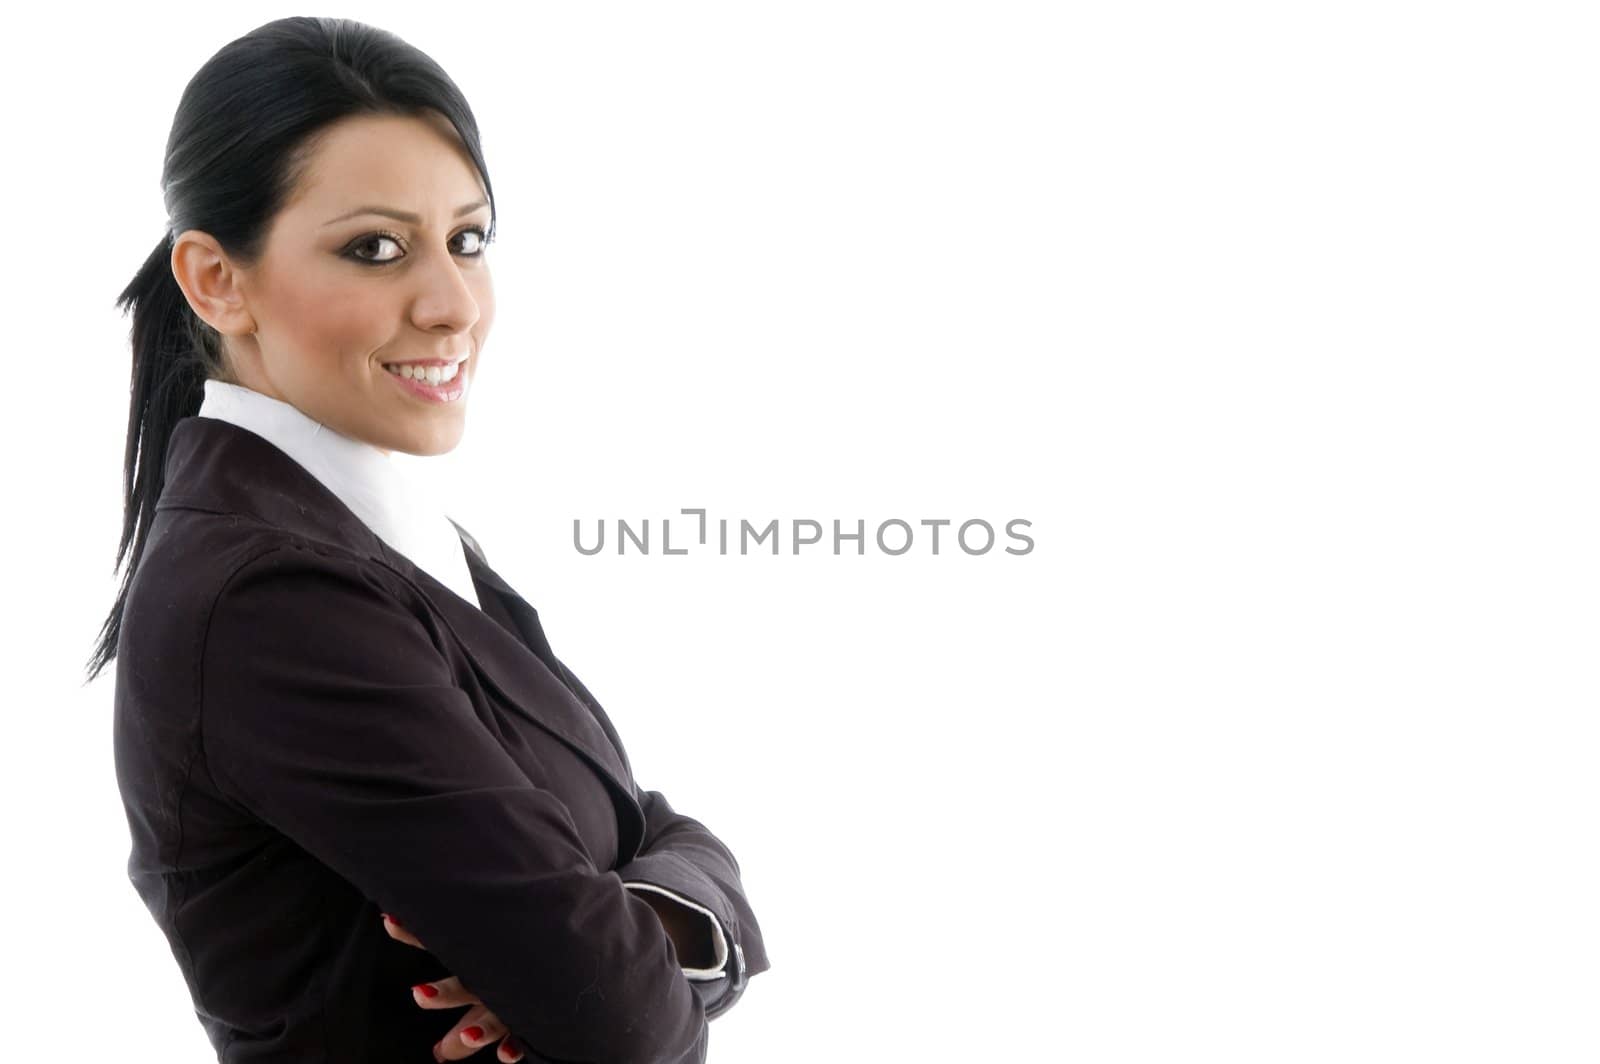 side view of young businesswoman by imagerymajestic